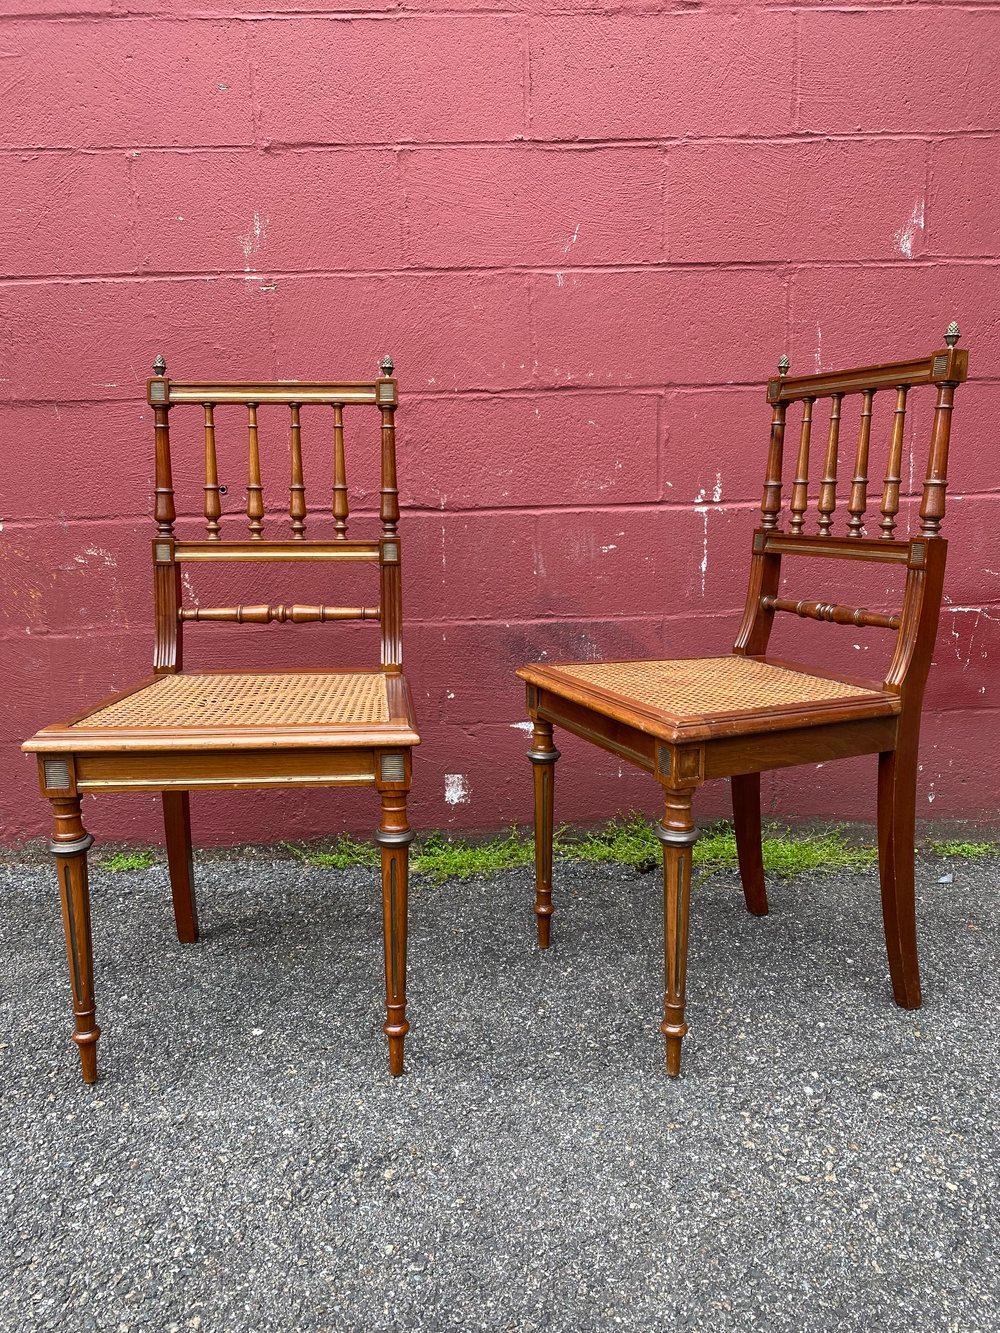 An exceptional pair of French 1900s neoclassical style side chairs with caned seats and brass detailing. This pair of neoclassical style side chairs offers a unique and sophisticated look for any space. The caned seats and brass detailing provide an